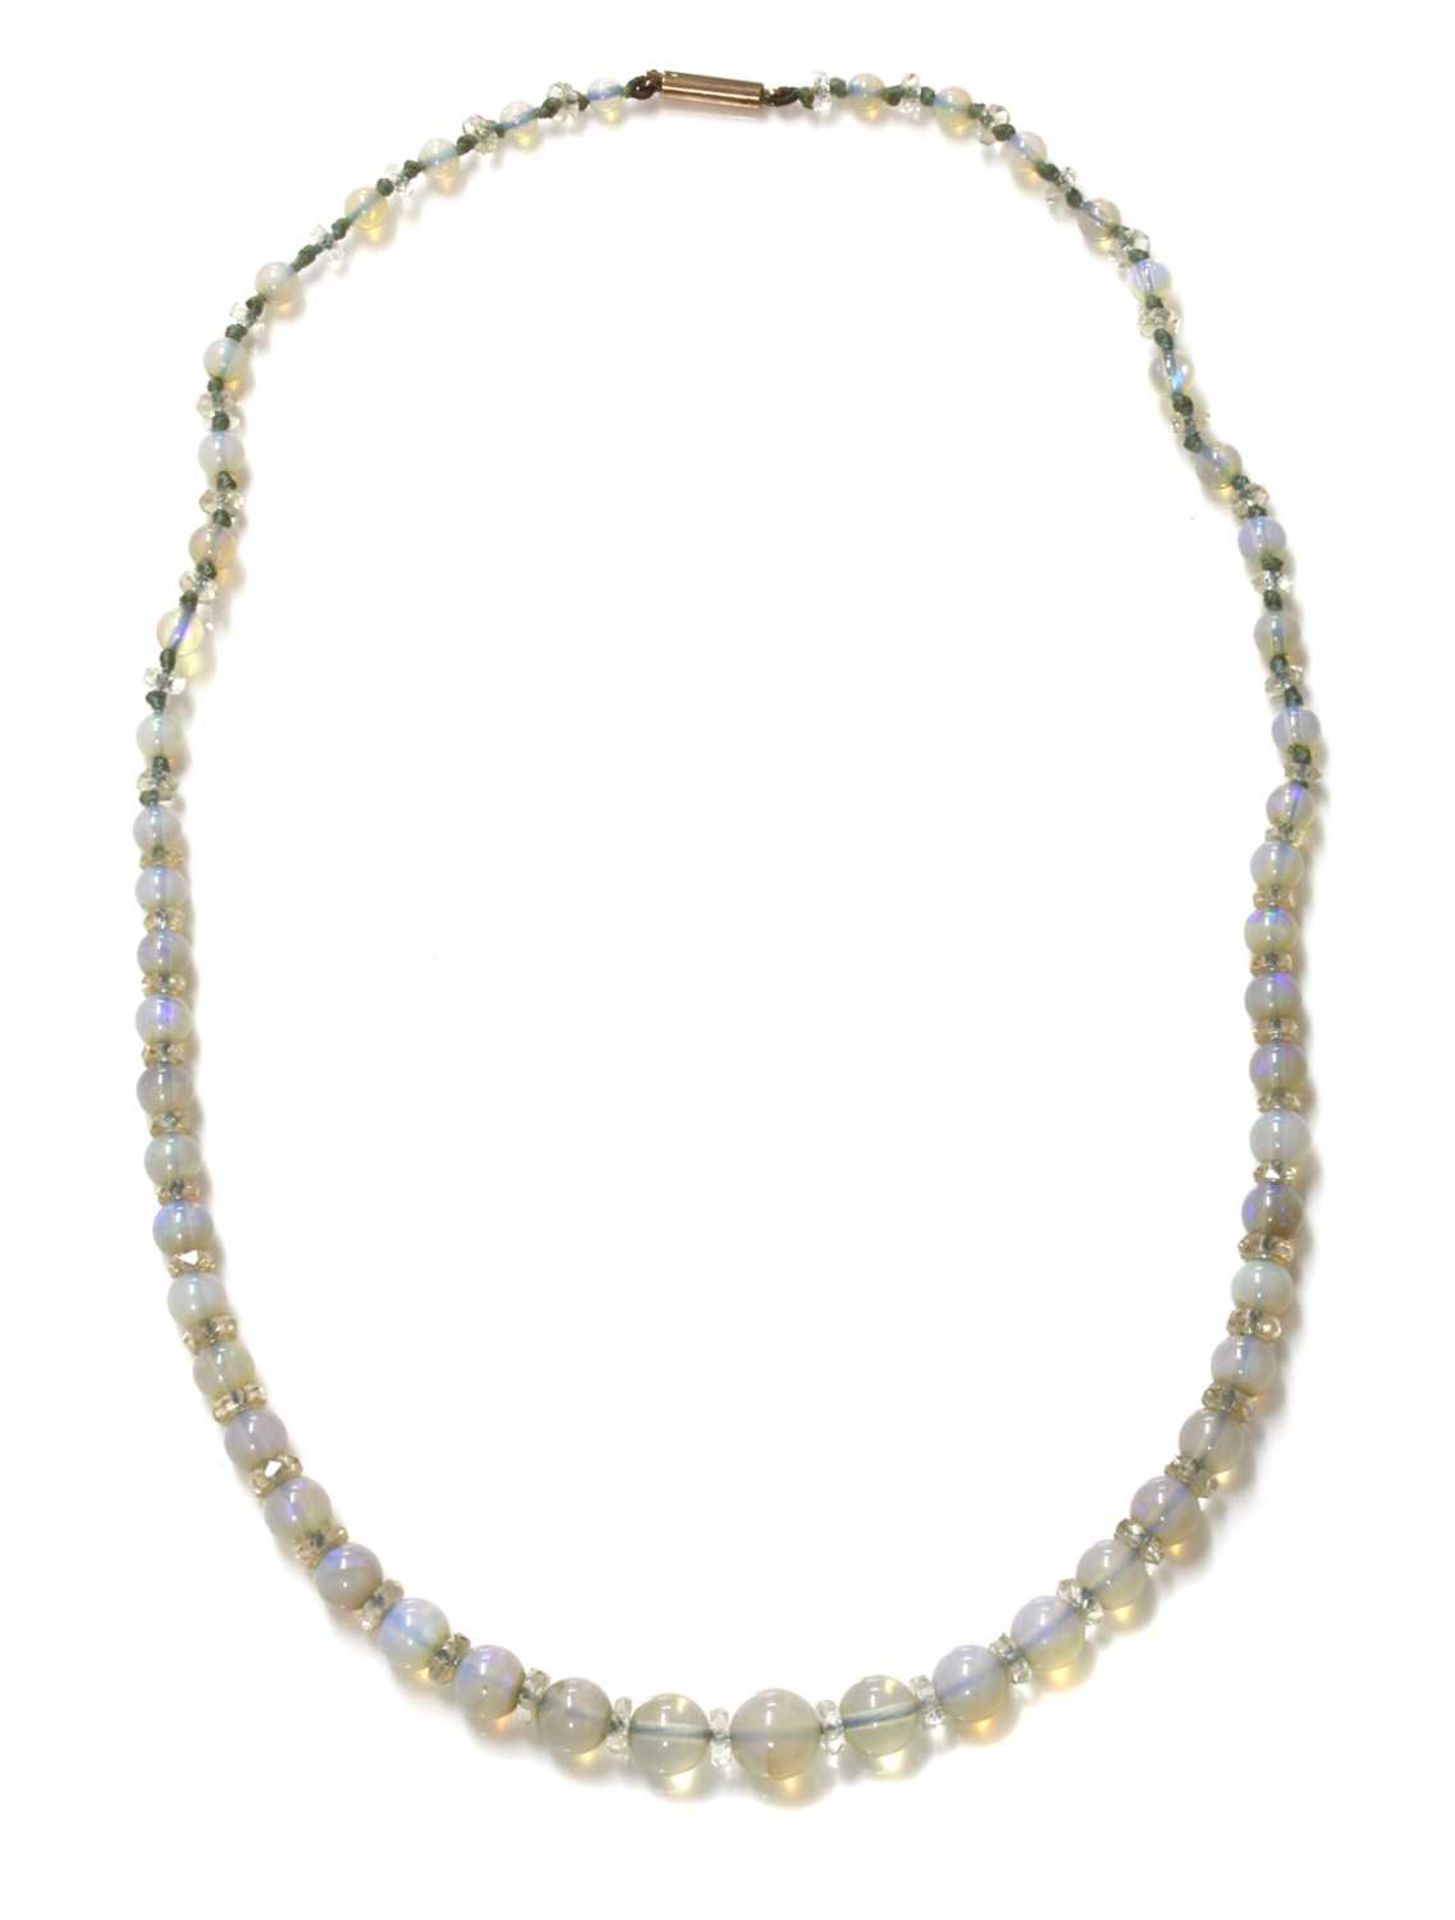 A single row graduated opal and glass bead necklace,